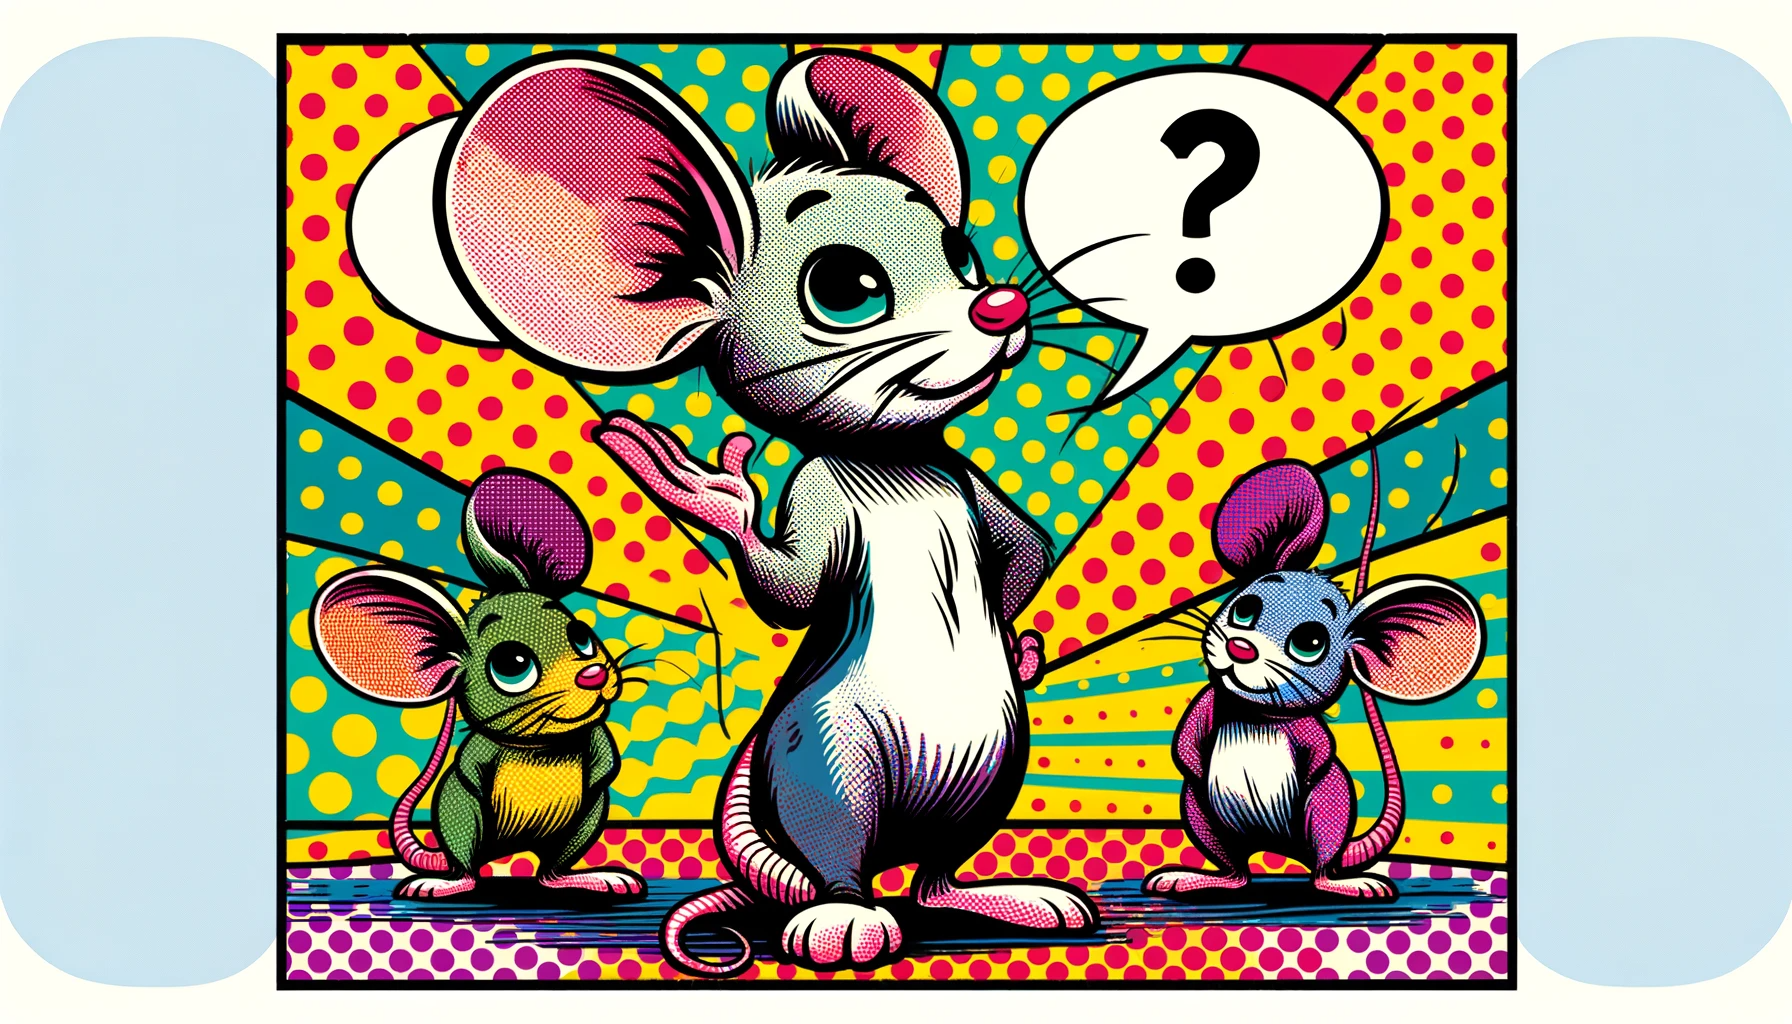 A mouse asking a question